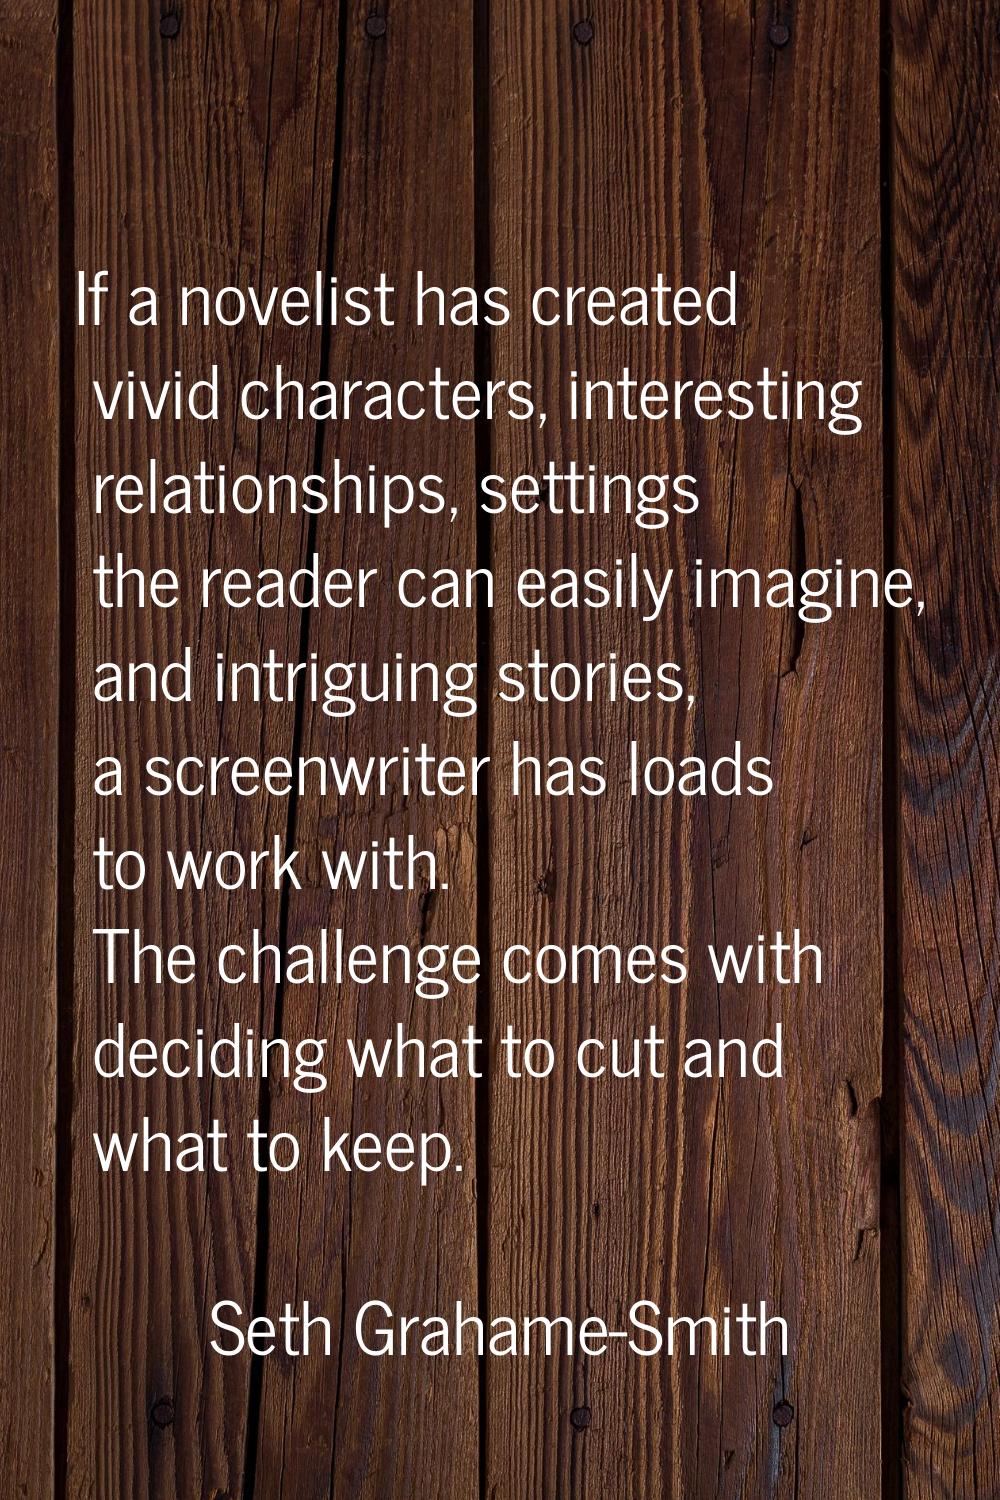 If a novelist has created vivid characters, interesting relationships, settings the reader can easi